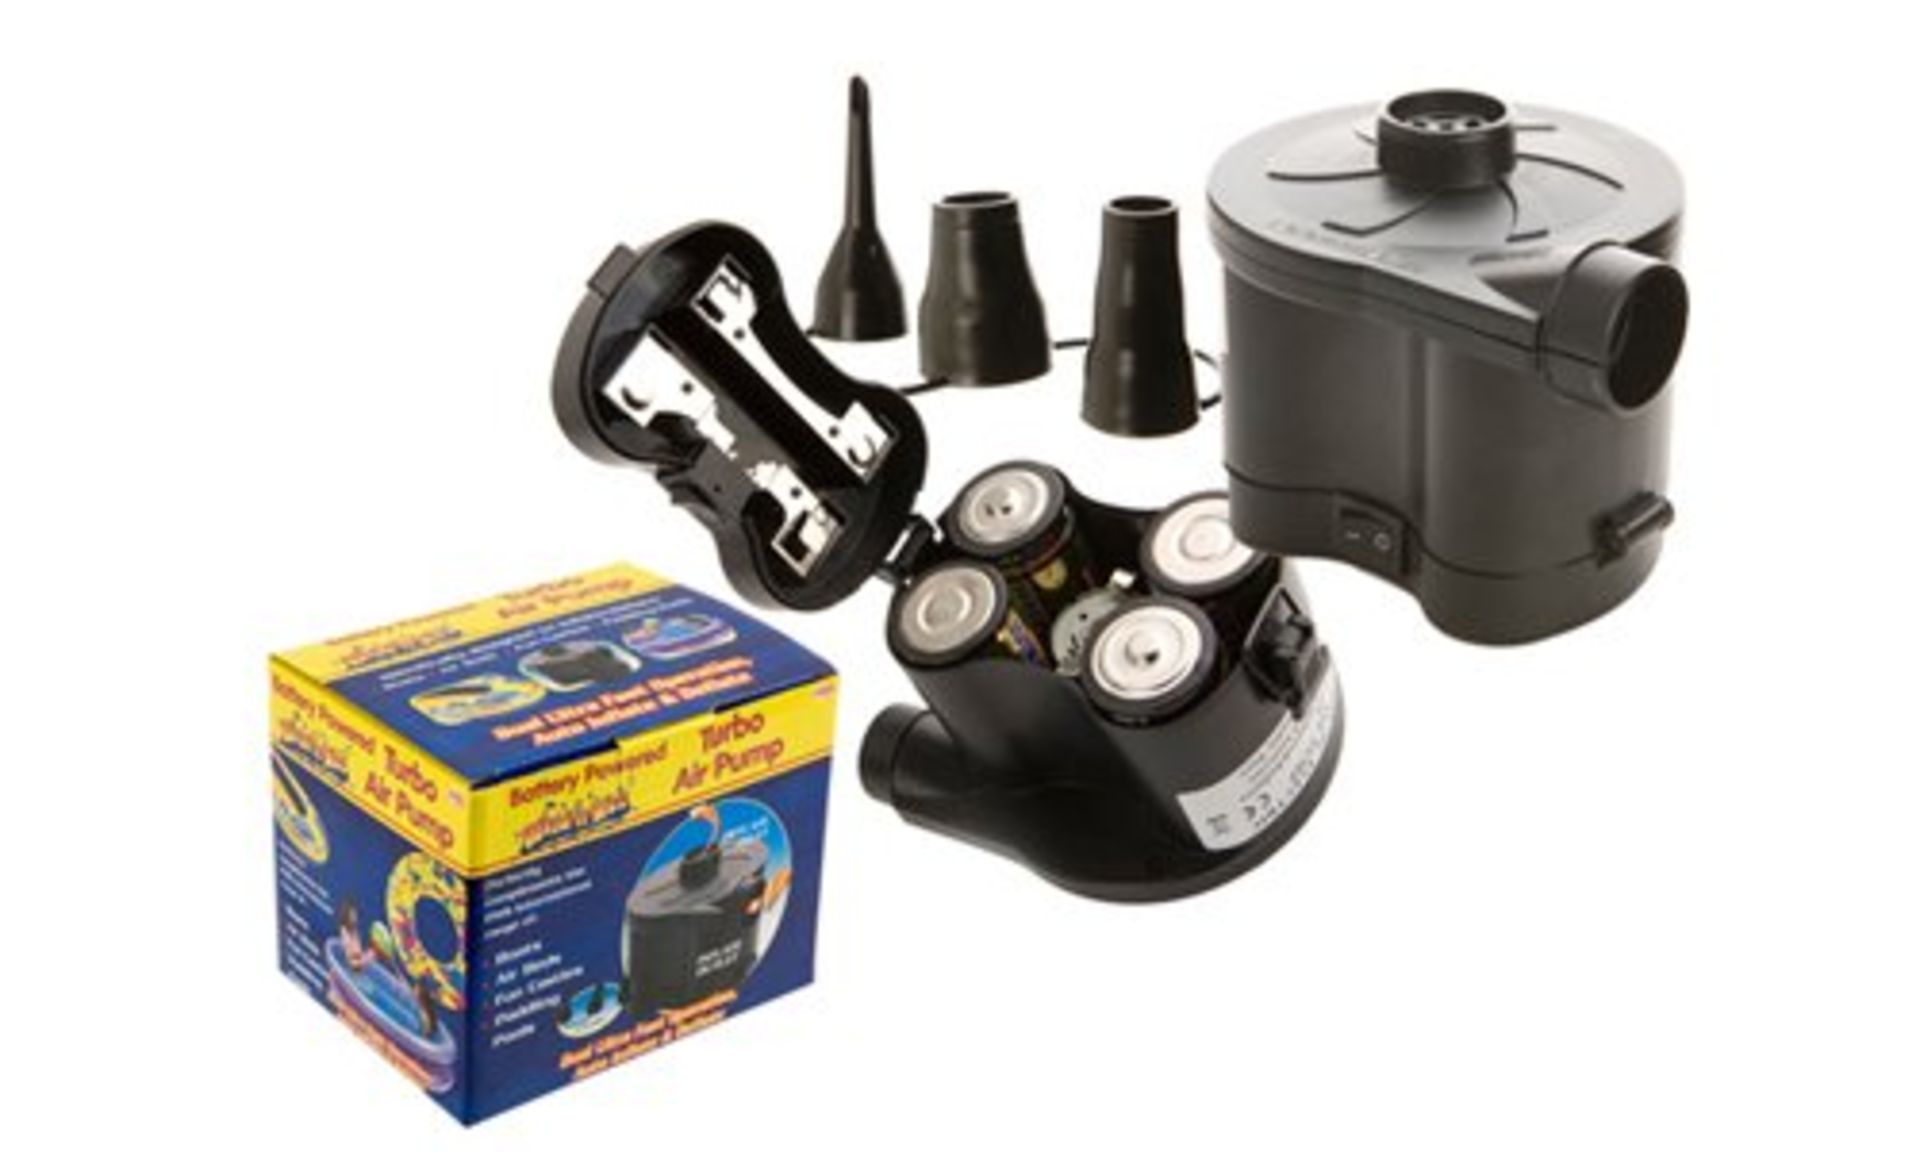 V *TRADE QTY* Brand New 6V Battery Operated Air Pump X 5 YOUR BID PRICE TO BE MULTIPLIED BY FIVE